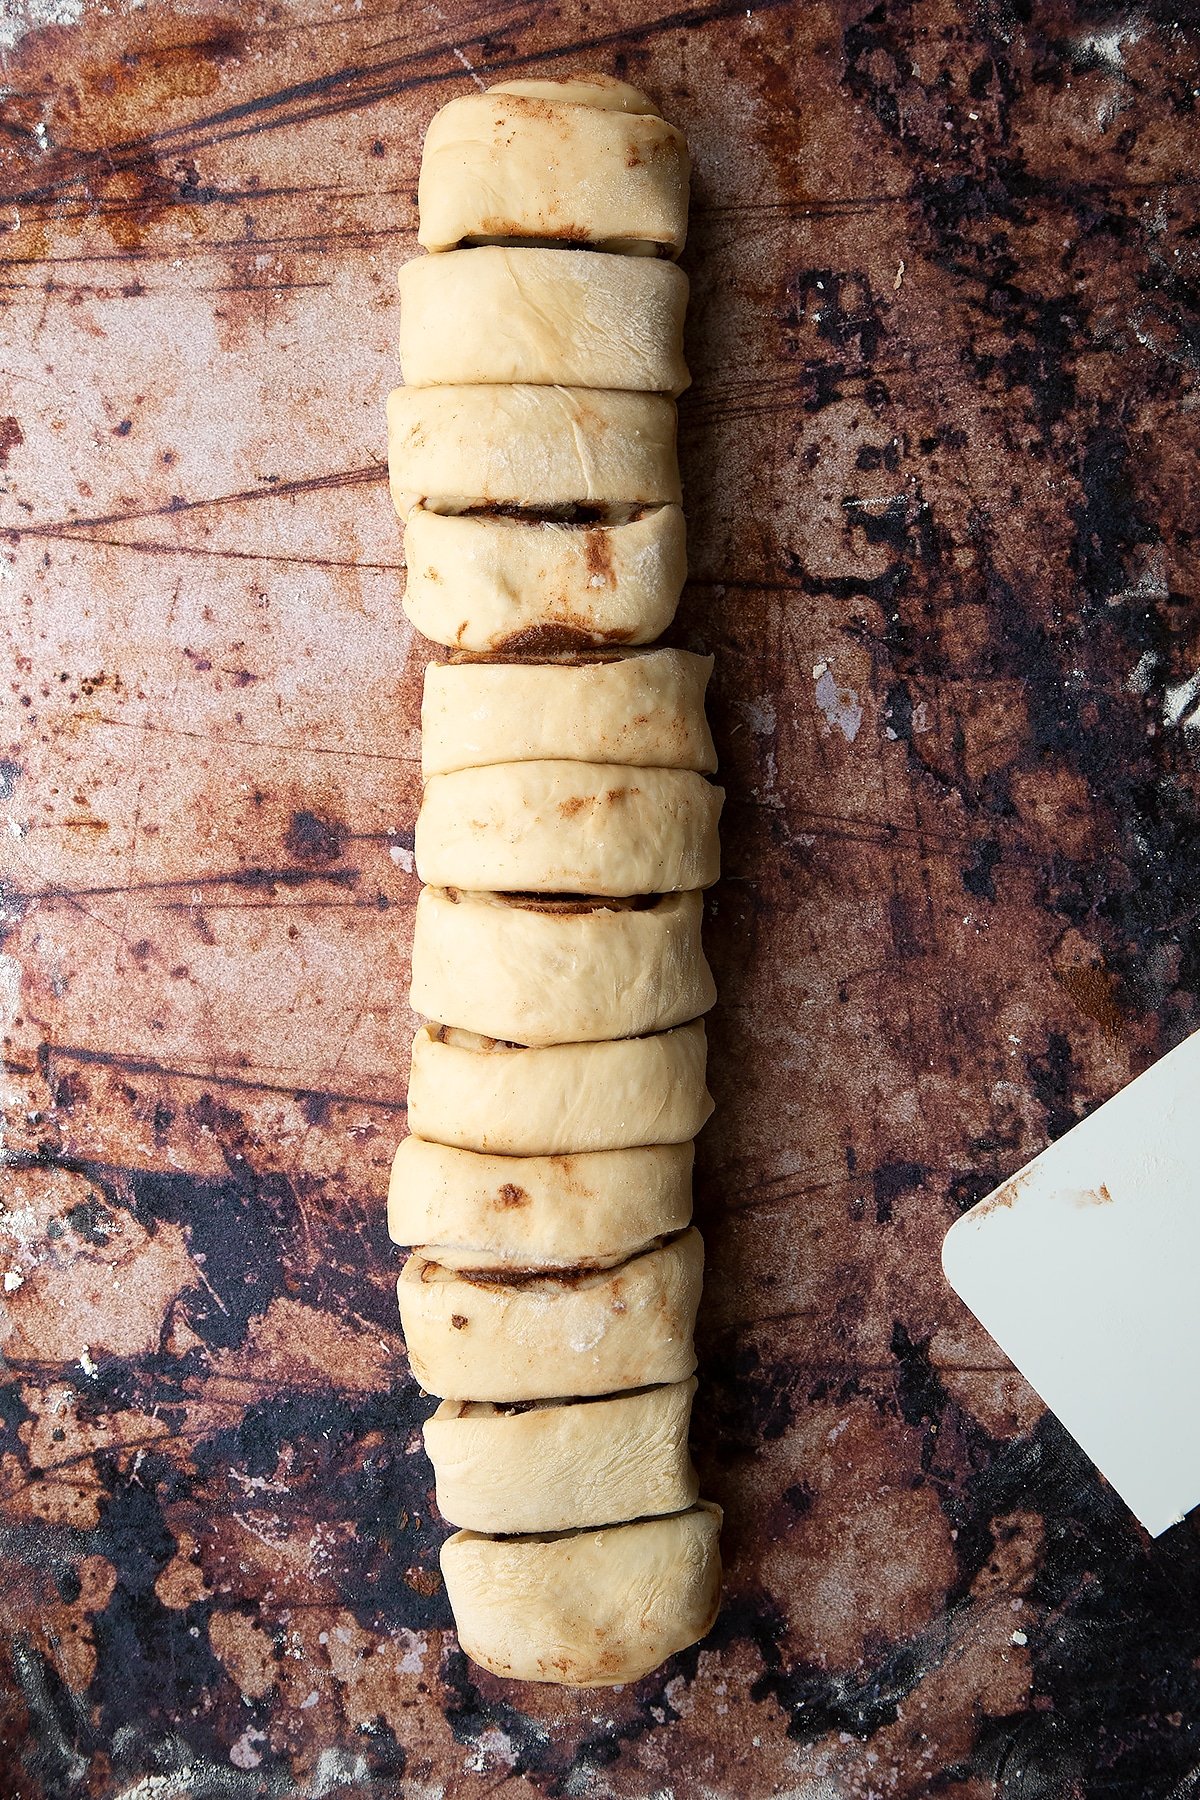 Overhead shot of dough layered with chocolate spread and rolled up into a sausage shape and cut into slices